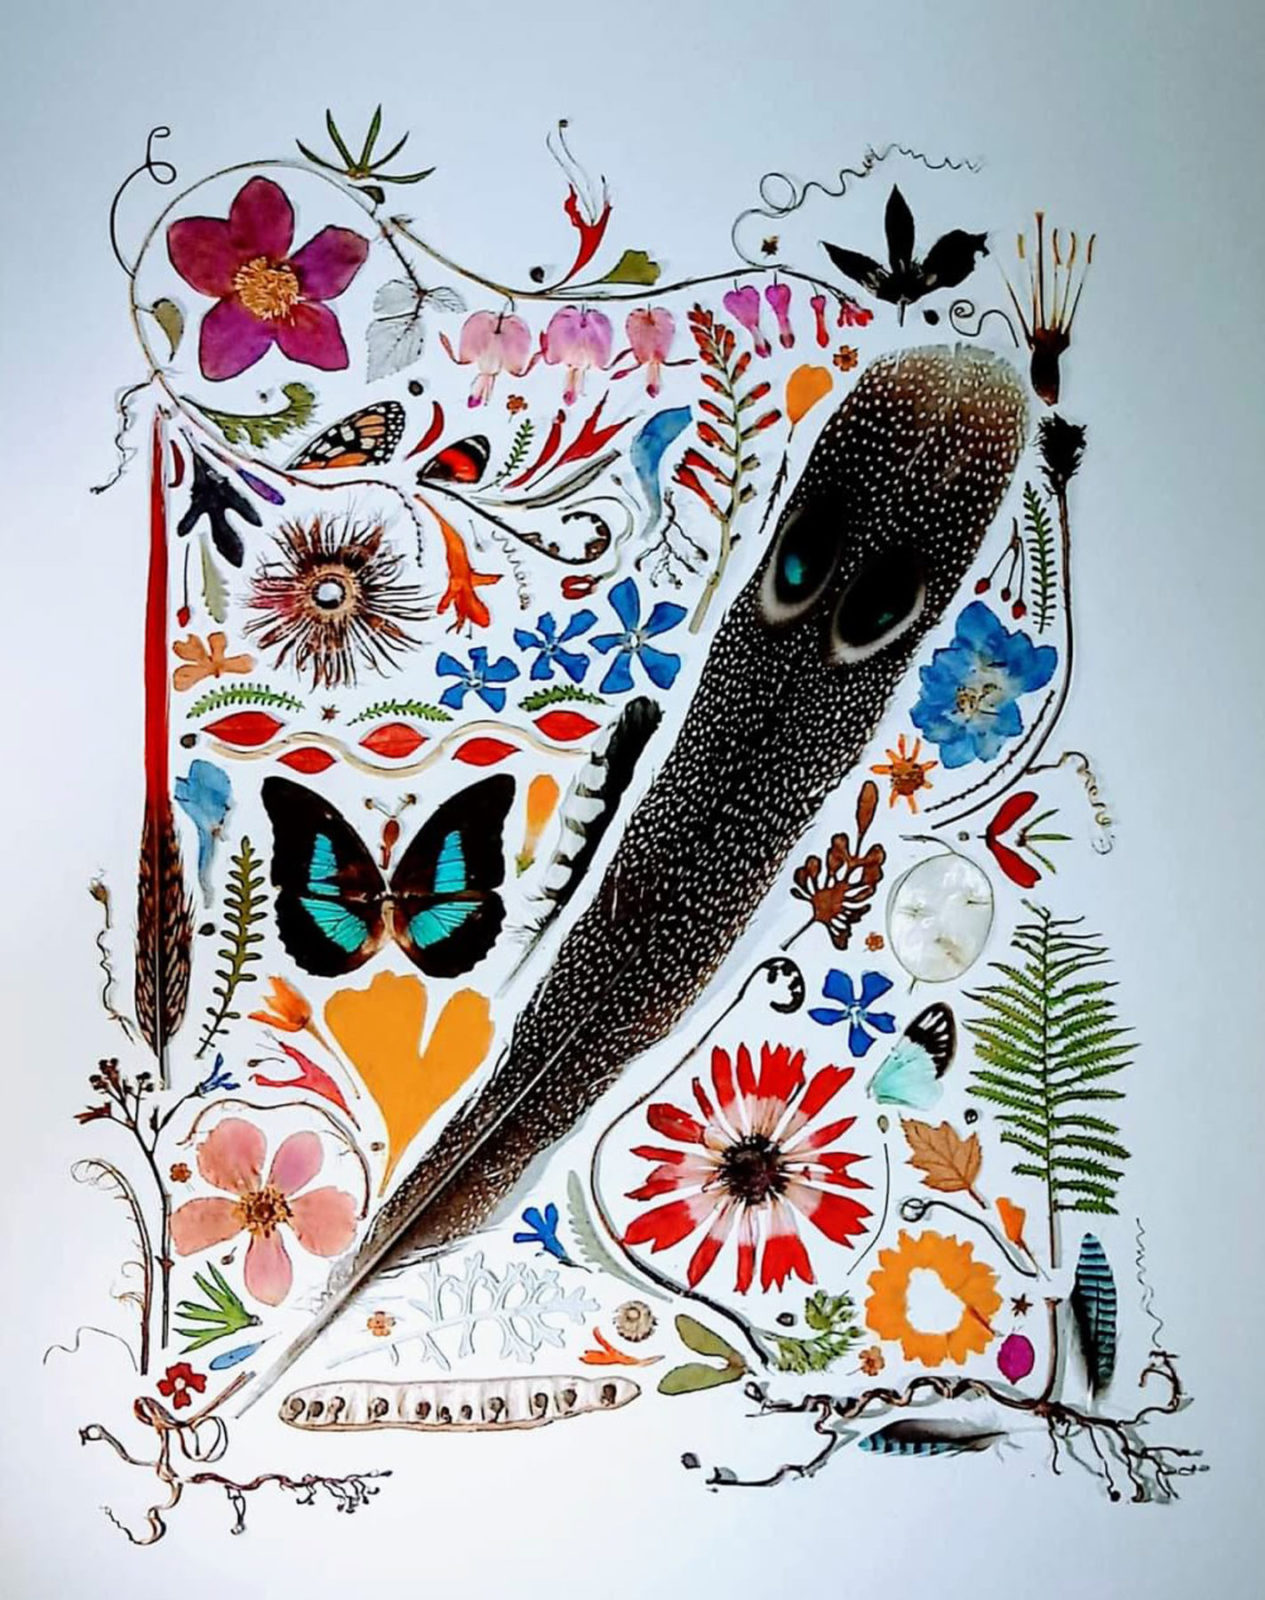 Sally Stang, Big Feather, pressed flora & fauna, 18 x 22 inches